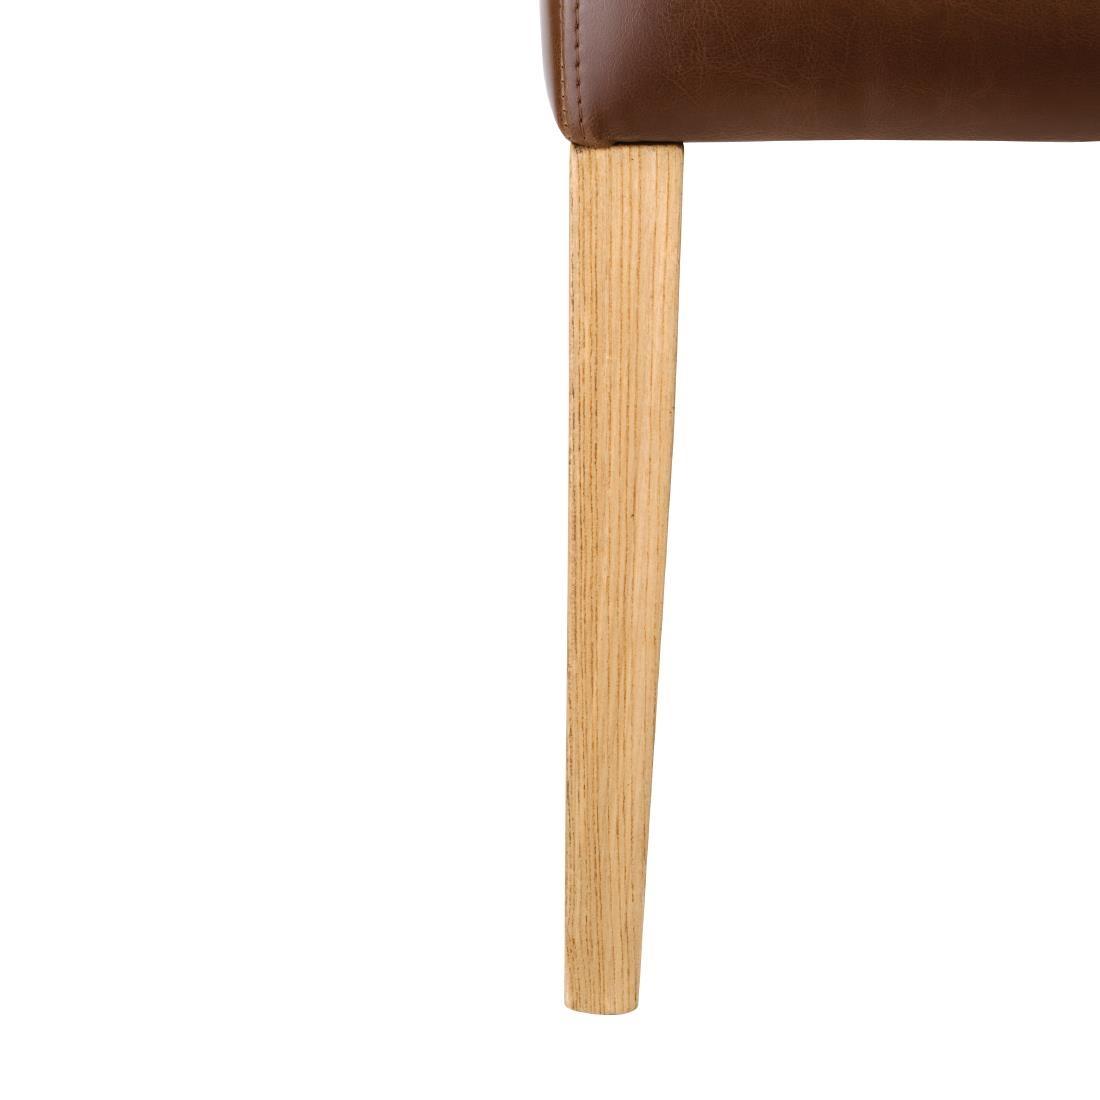 Bolero Chiswick Button Dining Chairs Tan Leather (Pack of 2) - DT699  - 5